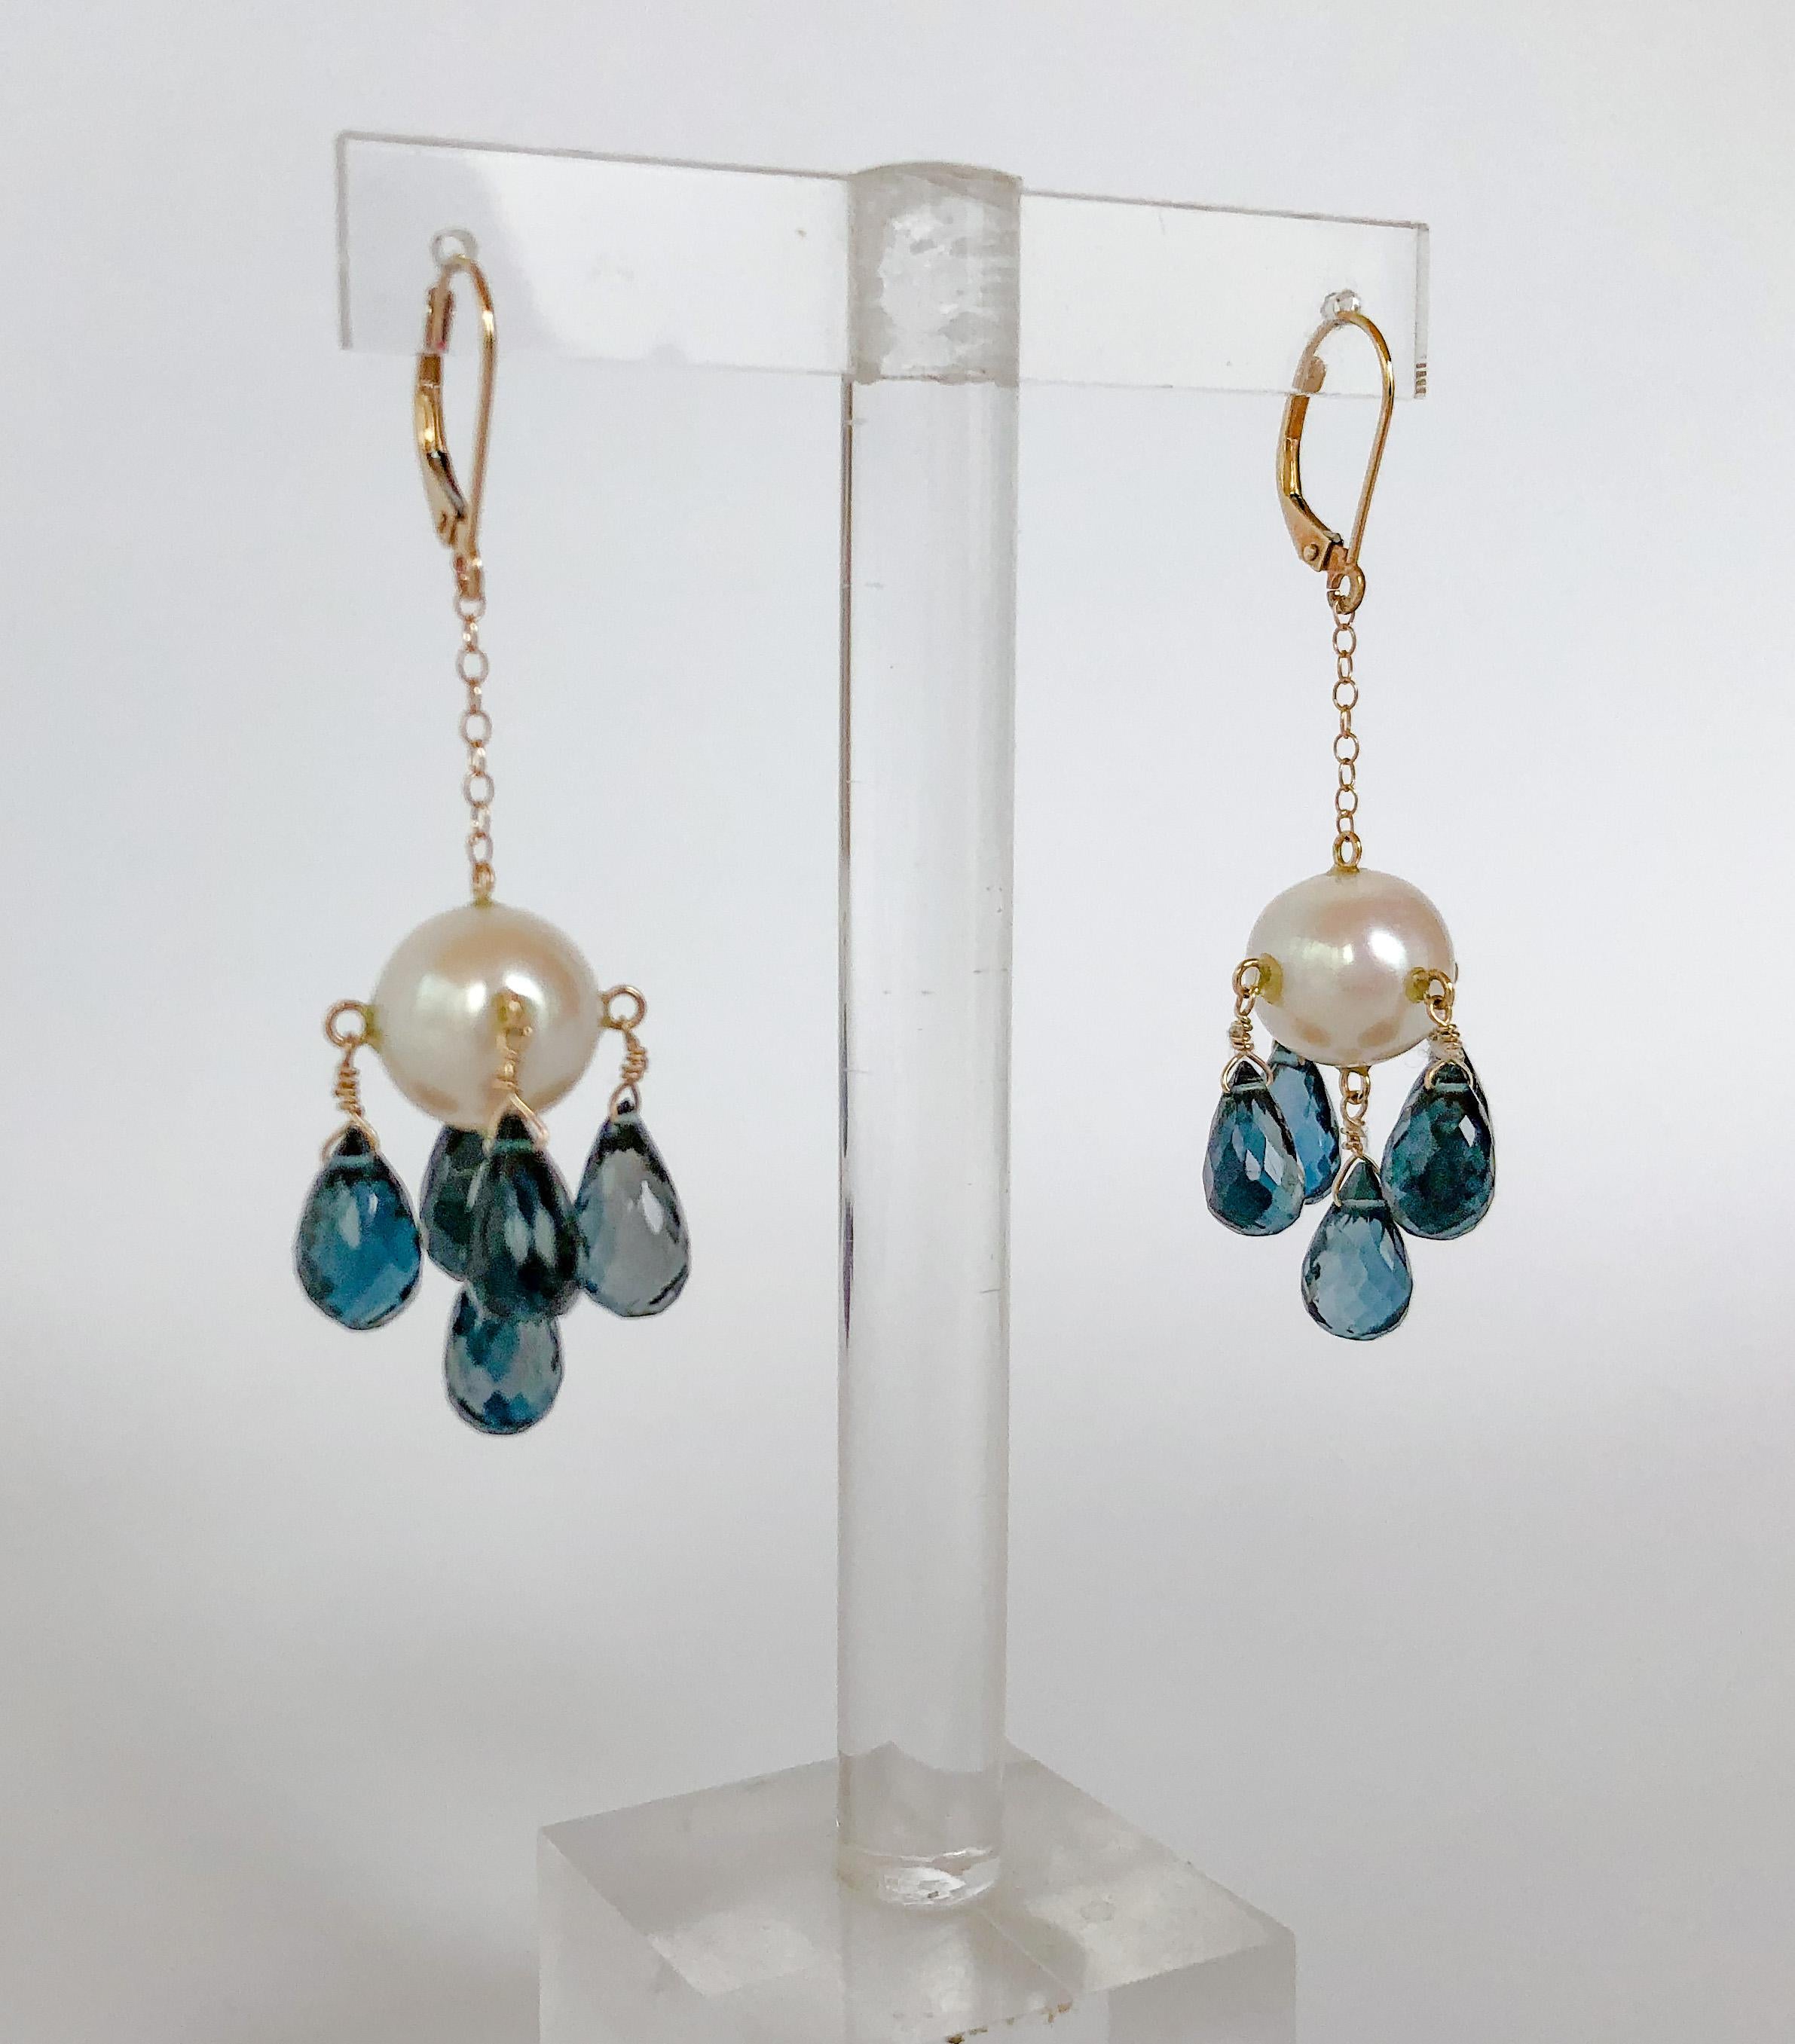 These eye-catching earrings are made with a large cultured pearl and 5 teardrop London blue topaz beads. The topaz is sure to stand out whenever it catches the light. The wiring and lever-backs are made with 14k yellow gold, which is sturdy and